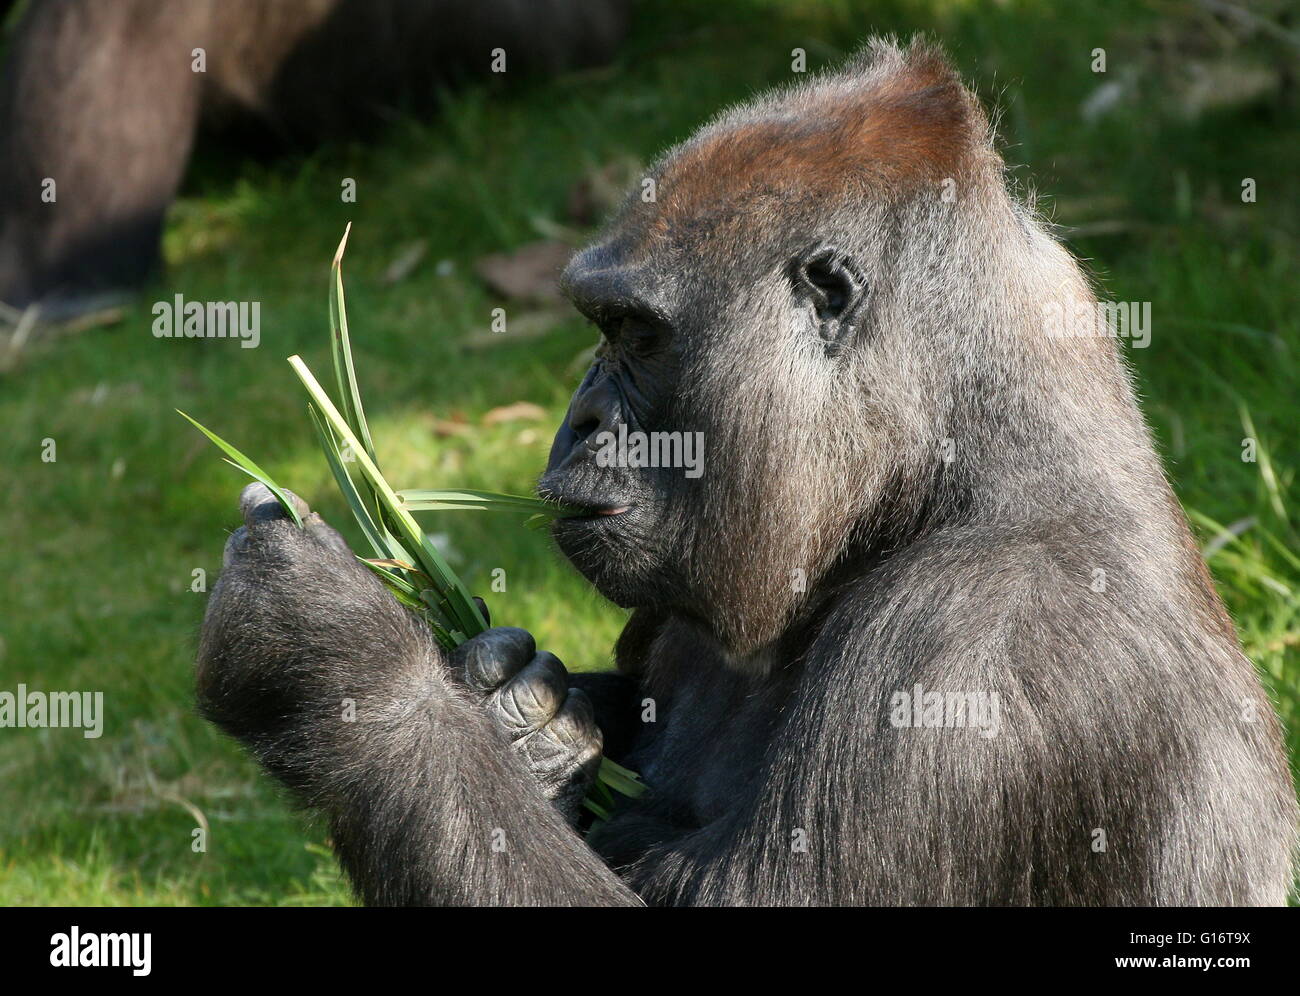 Mature male Western lowland gorilla eating grass and leaves Stock Photo